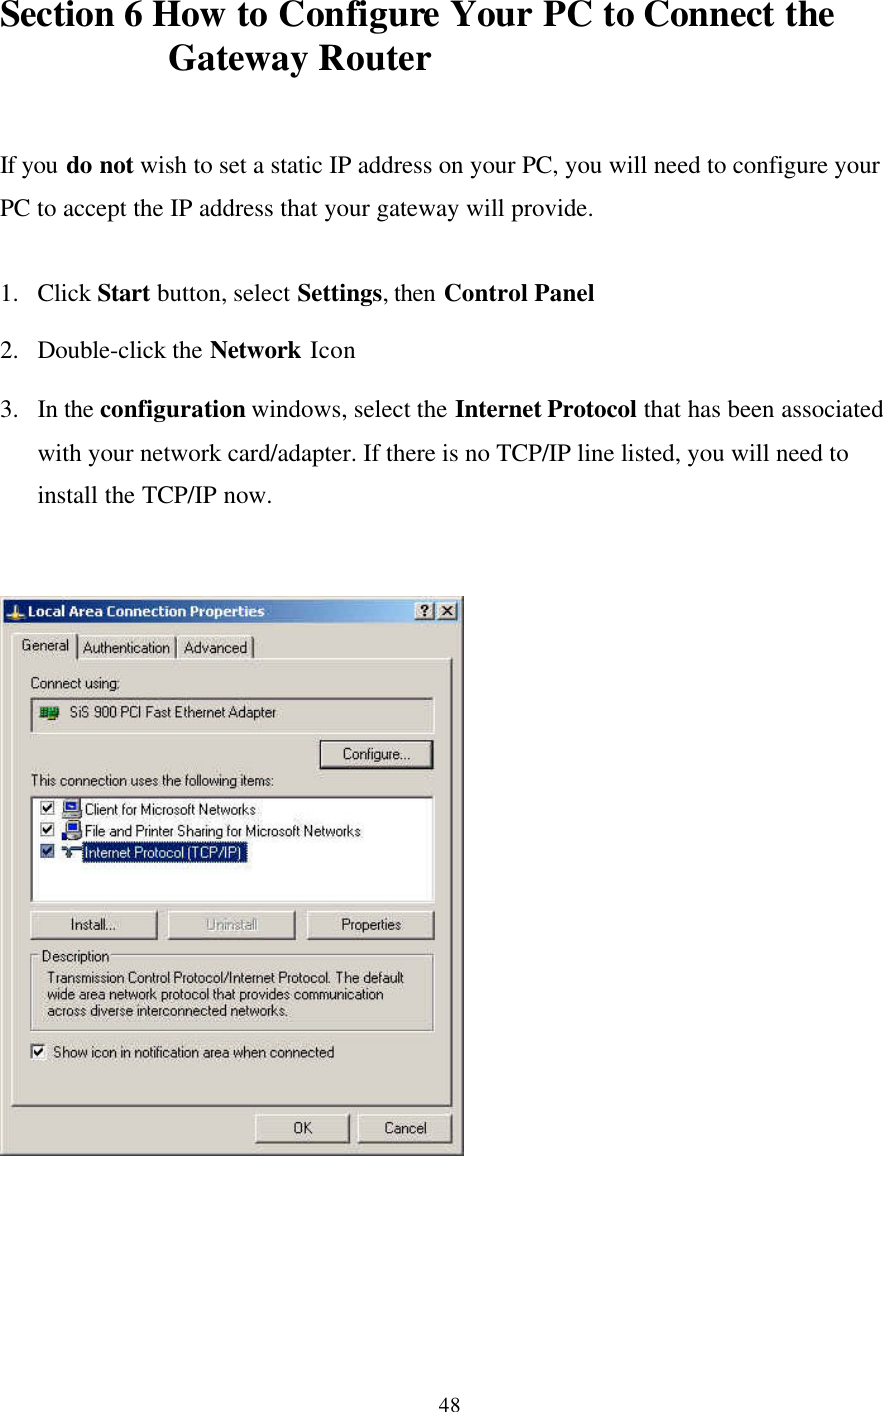 48Section 6 How to Configure Your PC to Connect theGateway RouterIf you do not wish to set a static IP address on your PC, you will need to configure yourPC to accept the IP address that your gateway will provide.1. Click Start button, select Settings, then Control Panel2. Double-click the Network Icon3. In the configuration windows, select the Internet Protocol that has been associatedwith your network card/adapter. If there is no TCP/IP line listed, you will need toinstall the TCP/IP now.